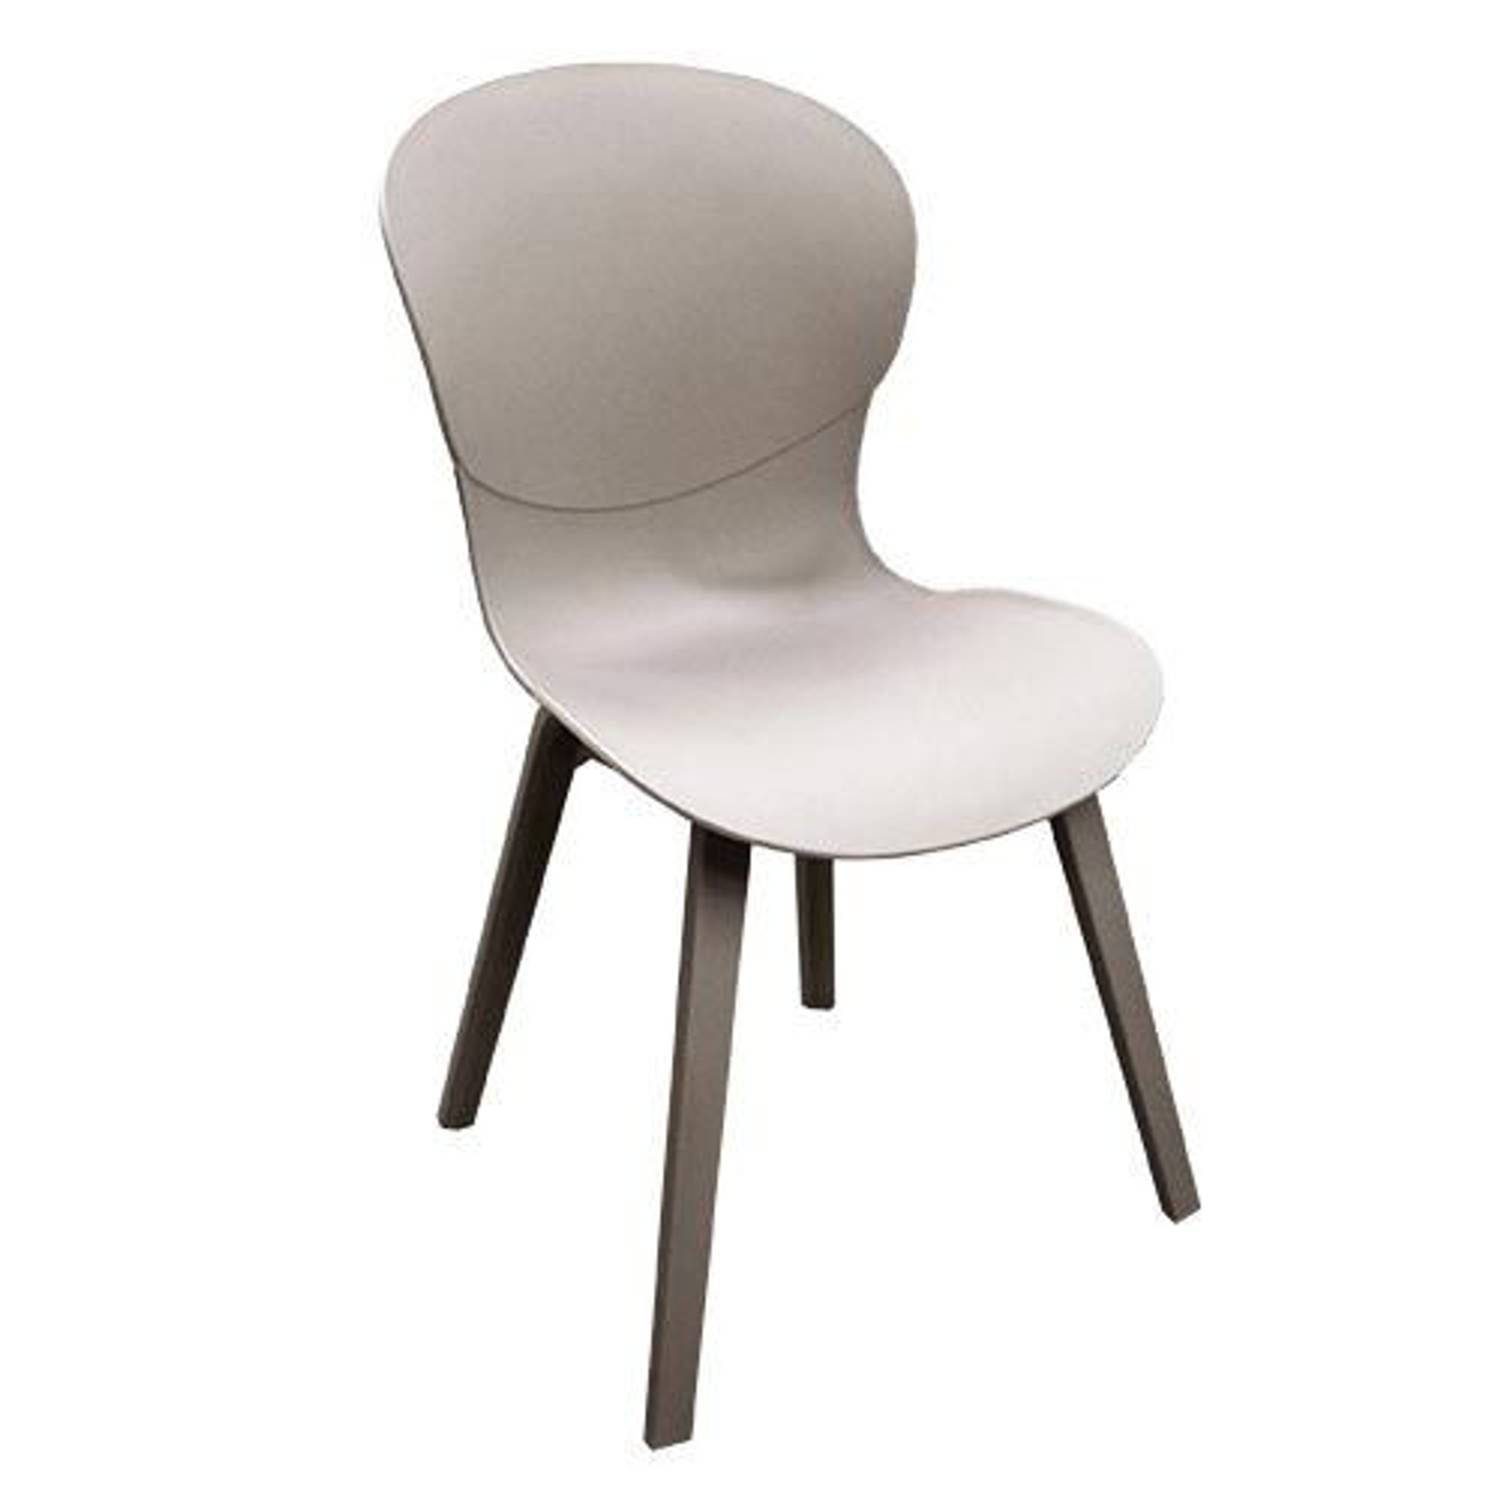 OWN - Danziger Dining tuinstoel - Taupe